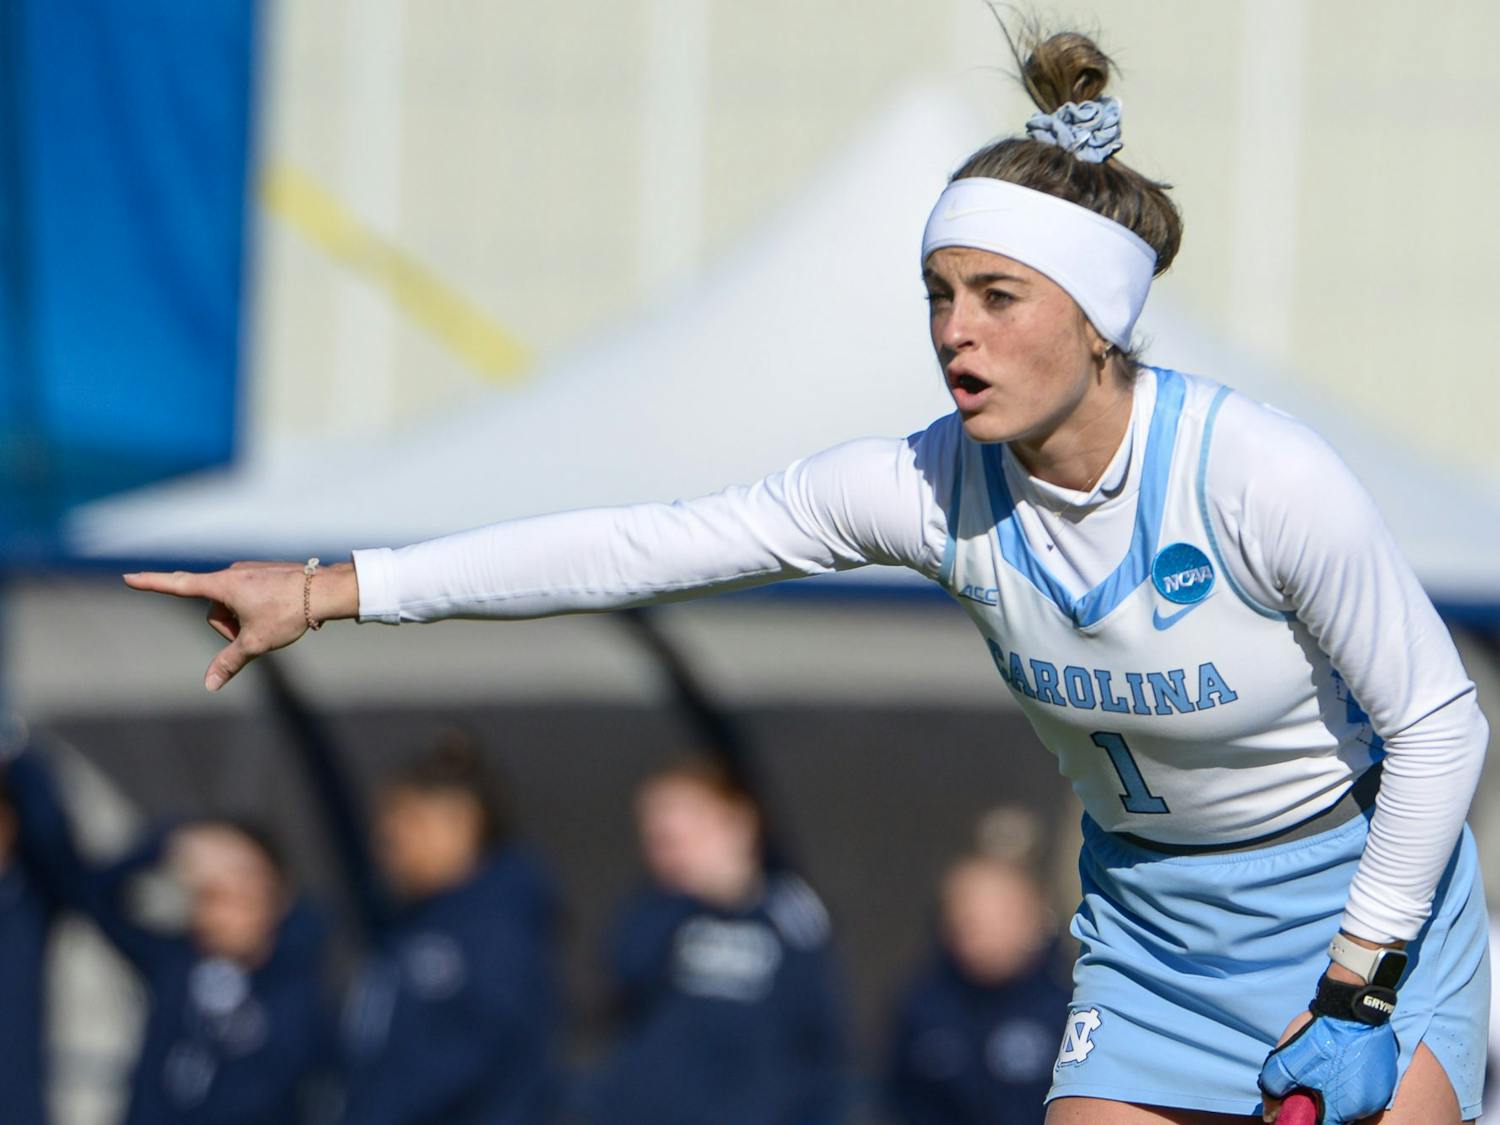 UNC senior forward, Erin Matson (1) plays in the National Champion ship game against No. 3 Northwestern on Sunday, Nov. 20, 2022, at George J. Sherman Sports Complex in Storrs, Conn. UNC won 2-1.&nbsp;